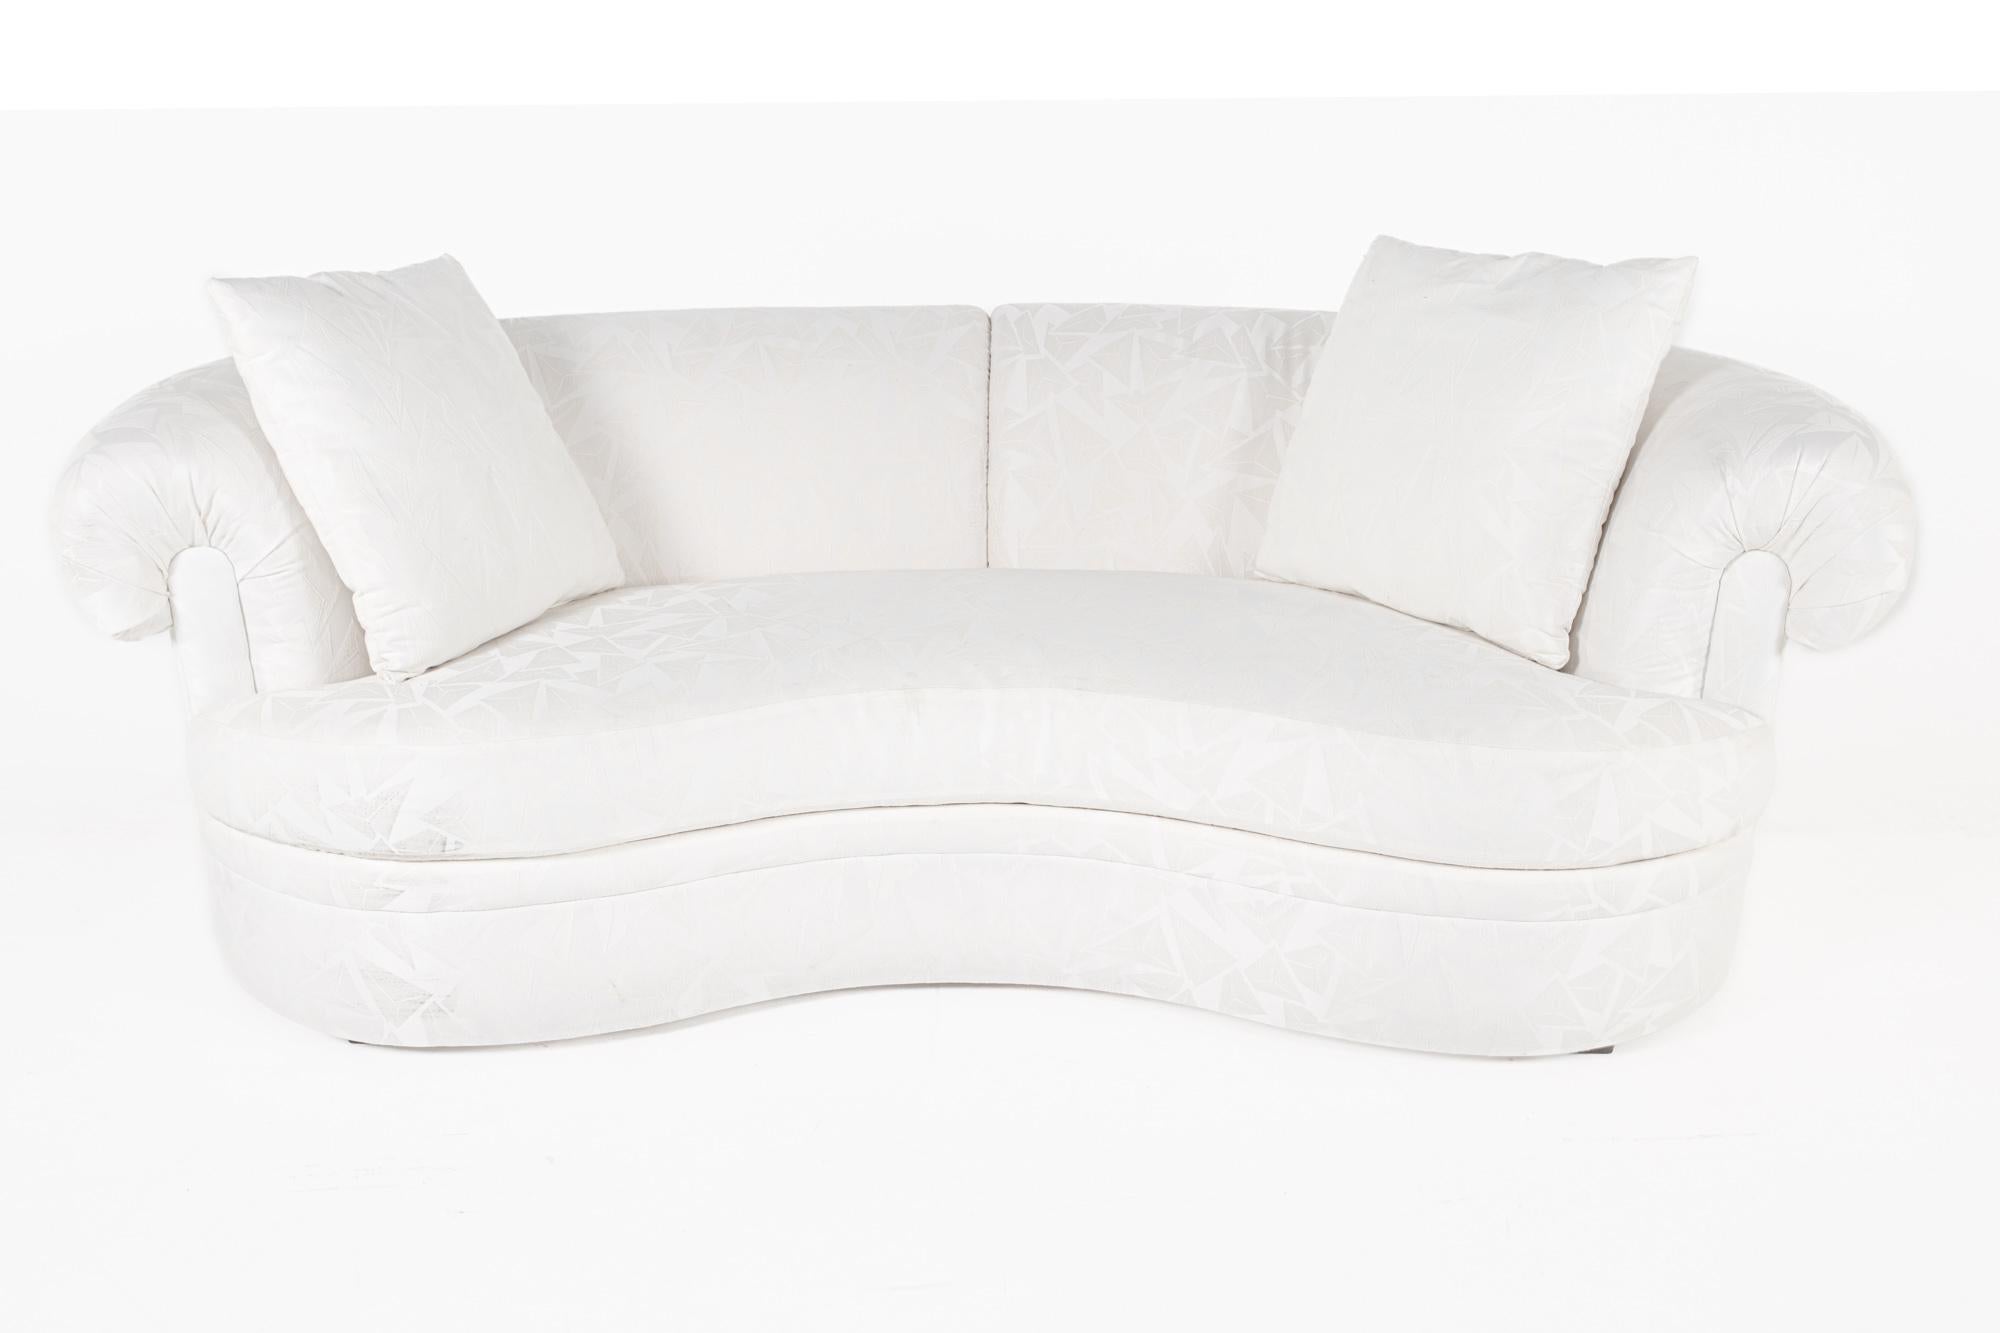 Bernhardt White upholstered curved sofa

This sofa measures: 90 wide x 44 deep x 33 inches high, with a seat height of 18 and arm height of 28 inches

This sofa is in Excellent Vintage Condition with minor marks, dents, and wear.

About